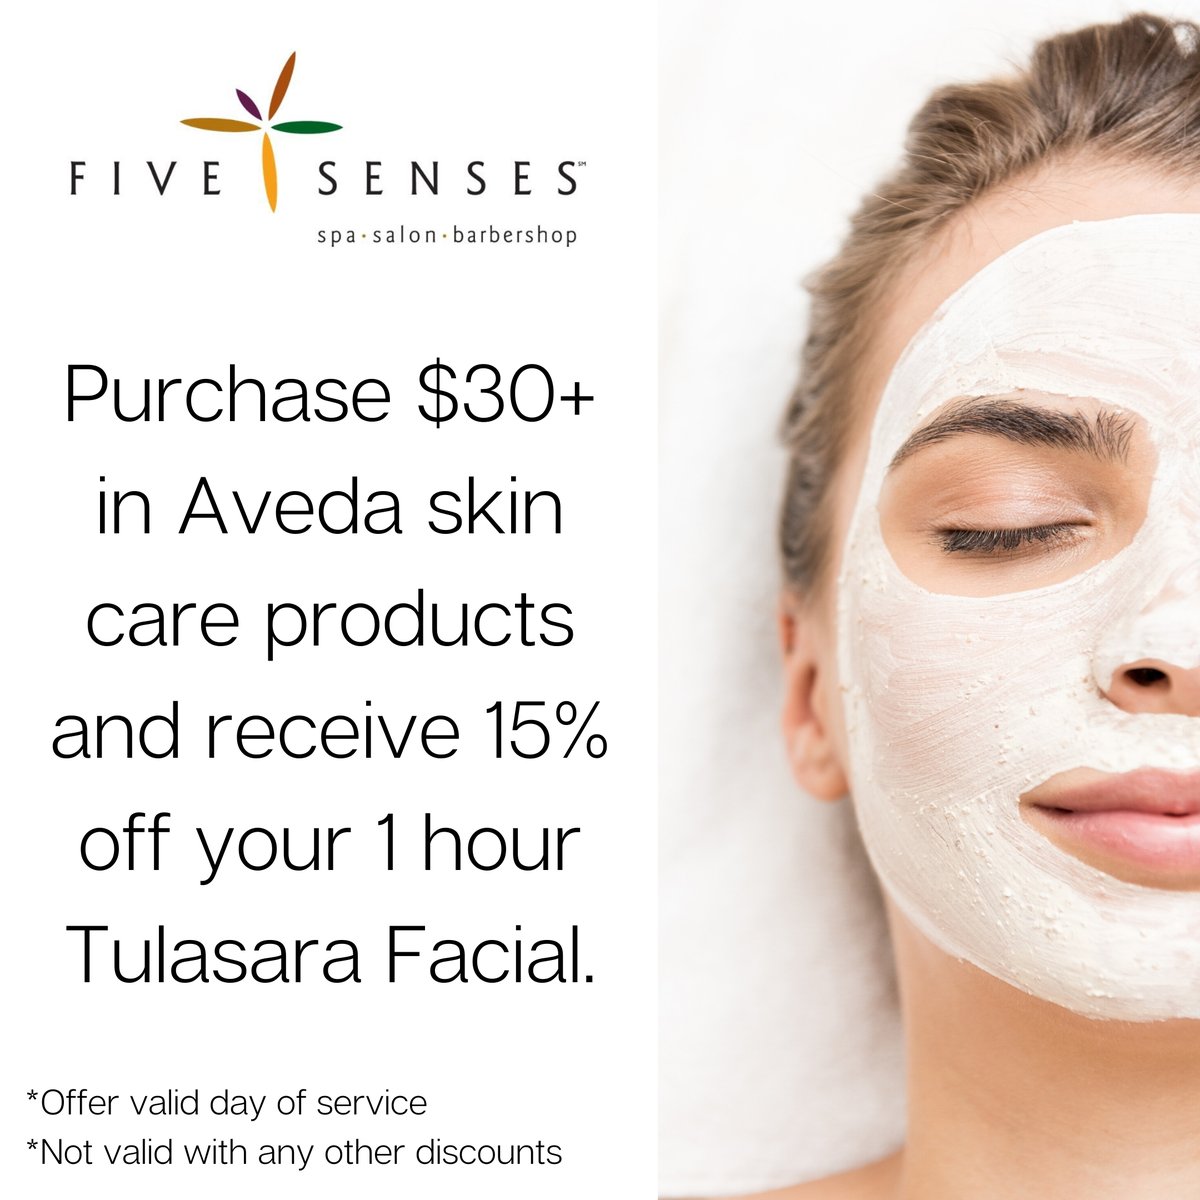 Receive 15% OFF your facial when you purchase $30 in Aveda skin care products! 🧖🏼‍♀️

To schedule, call (309) 693-7719 or book online by clicking the link below. 
bit.ly/2S8Y5M9

#fivesensespeoria #peoriasalon #centralil